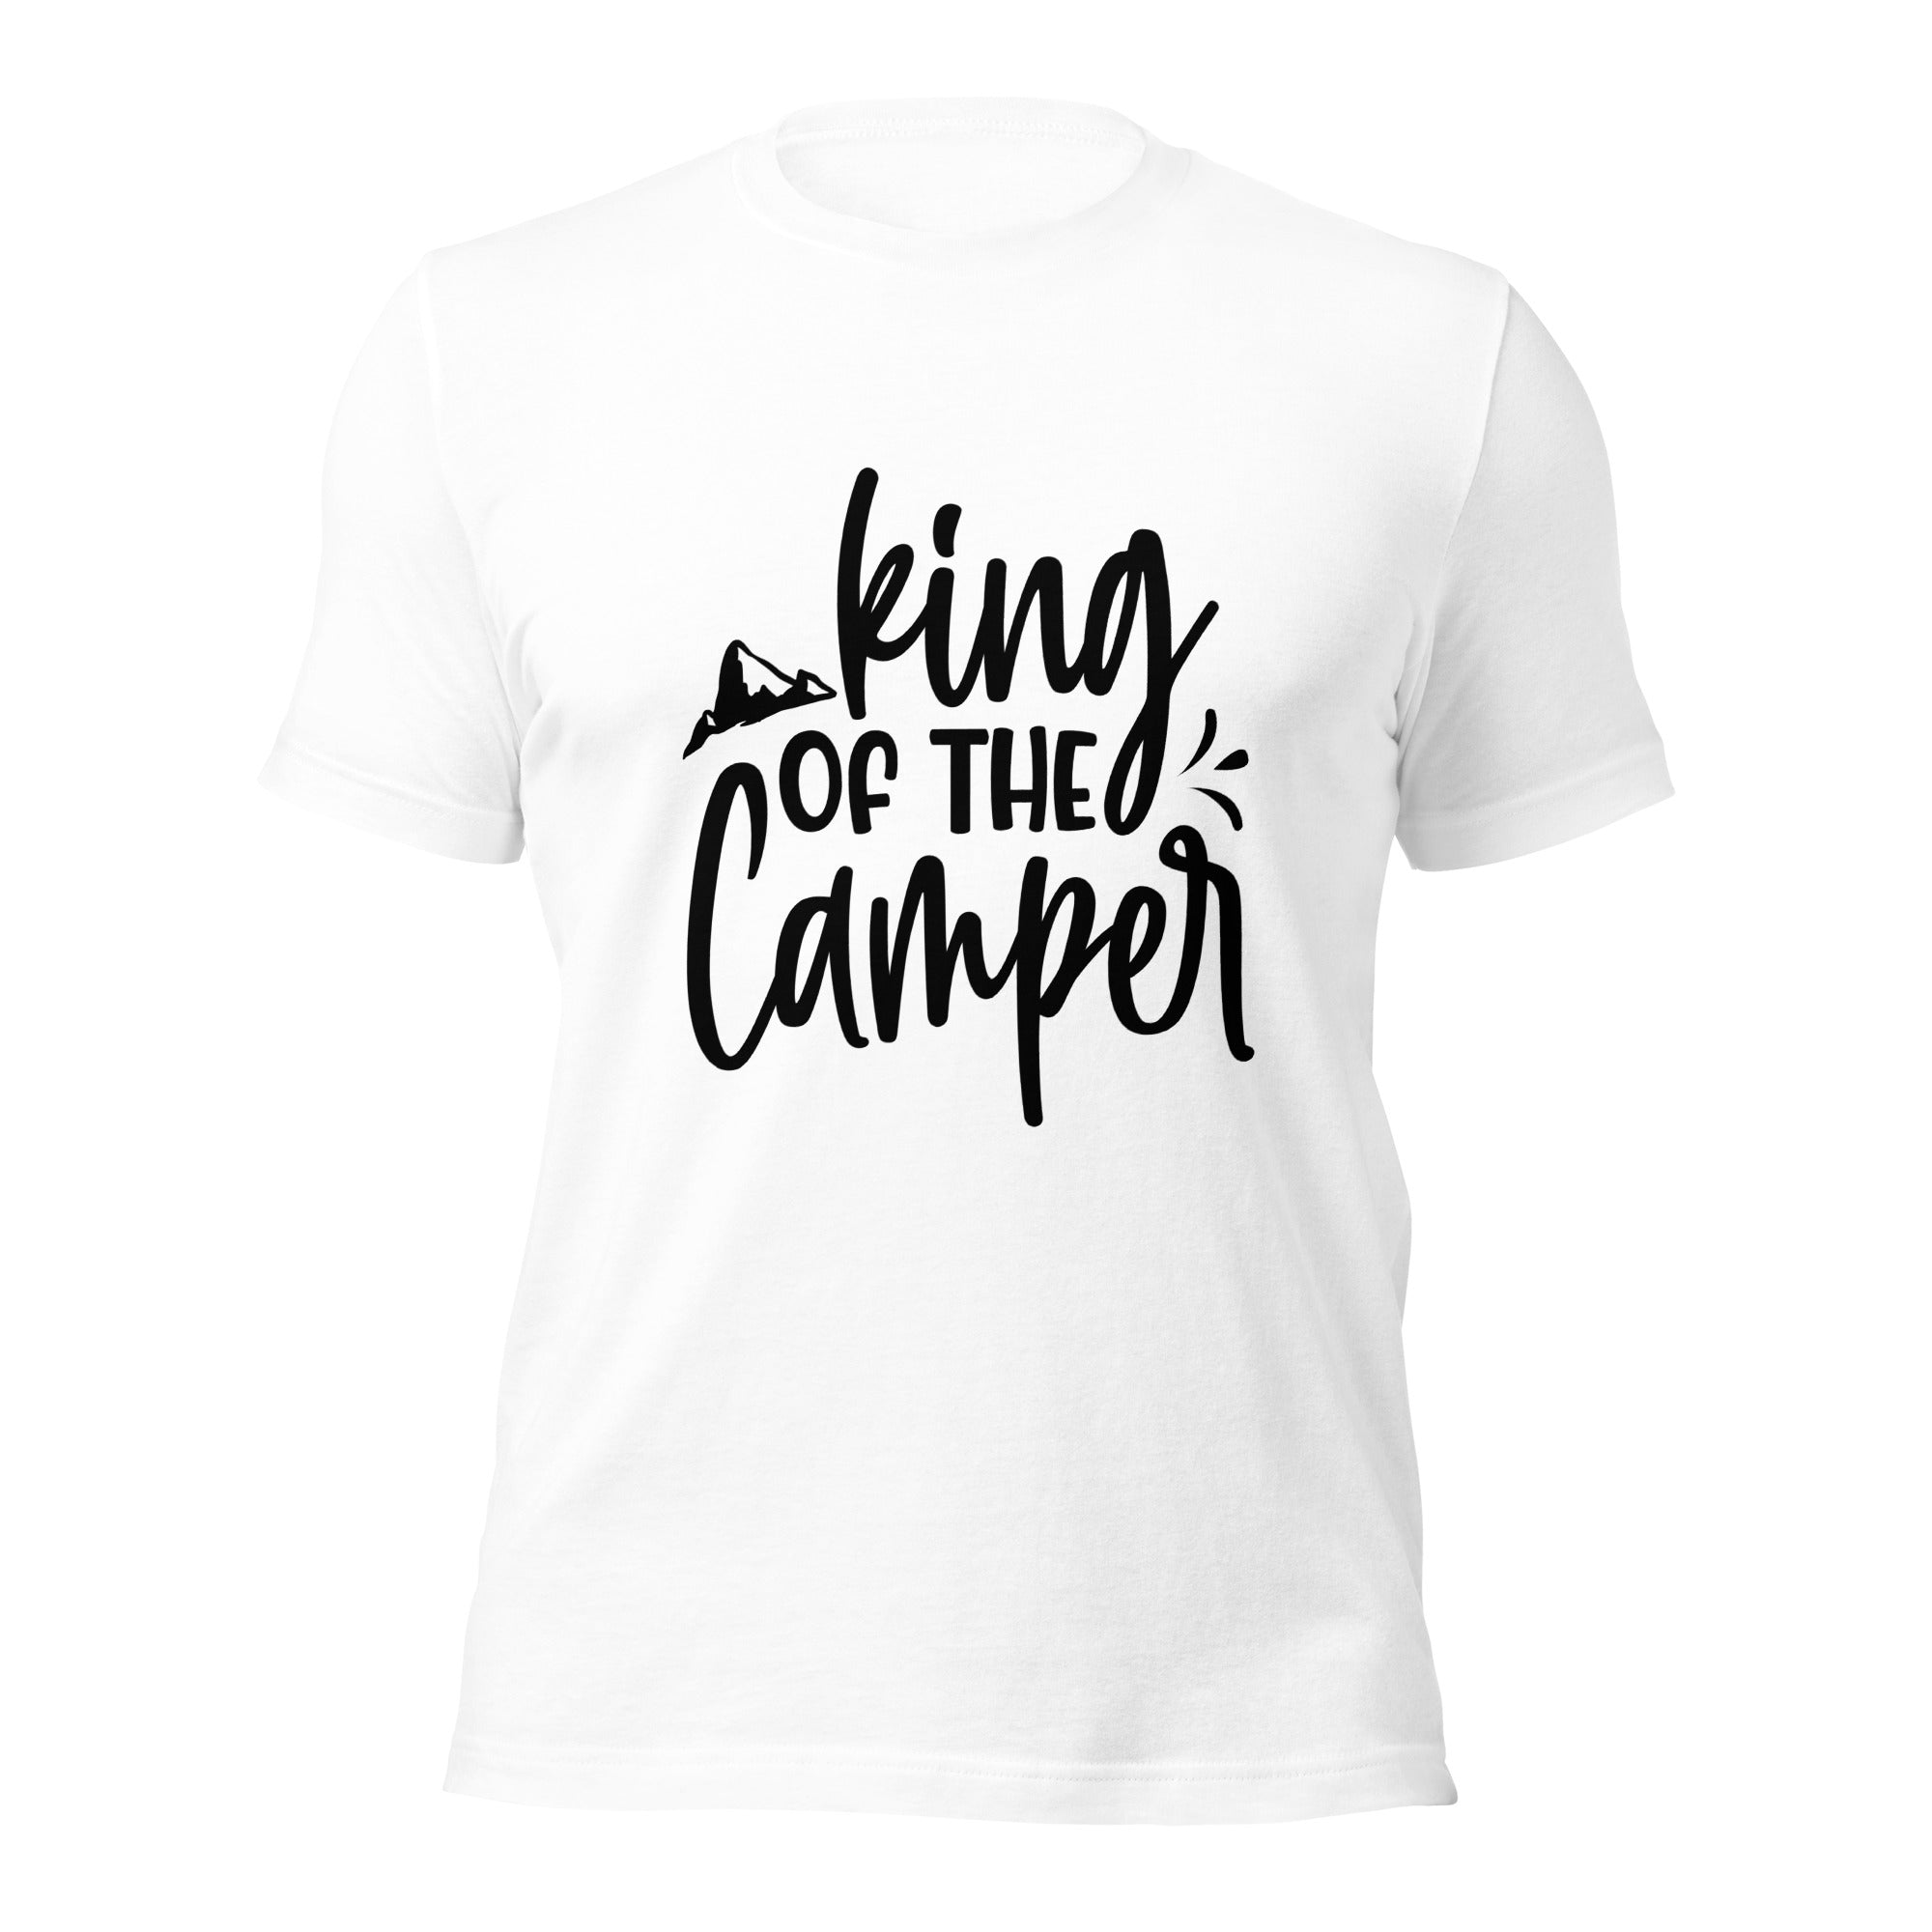 King Of The Camper - T-Shirt